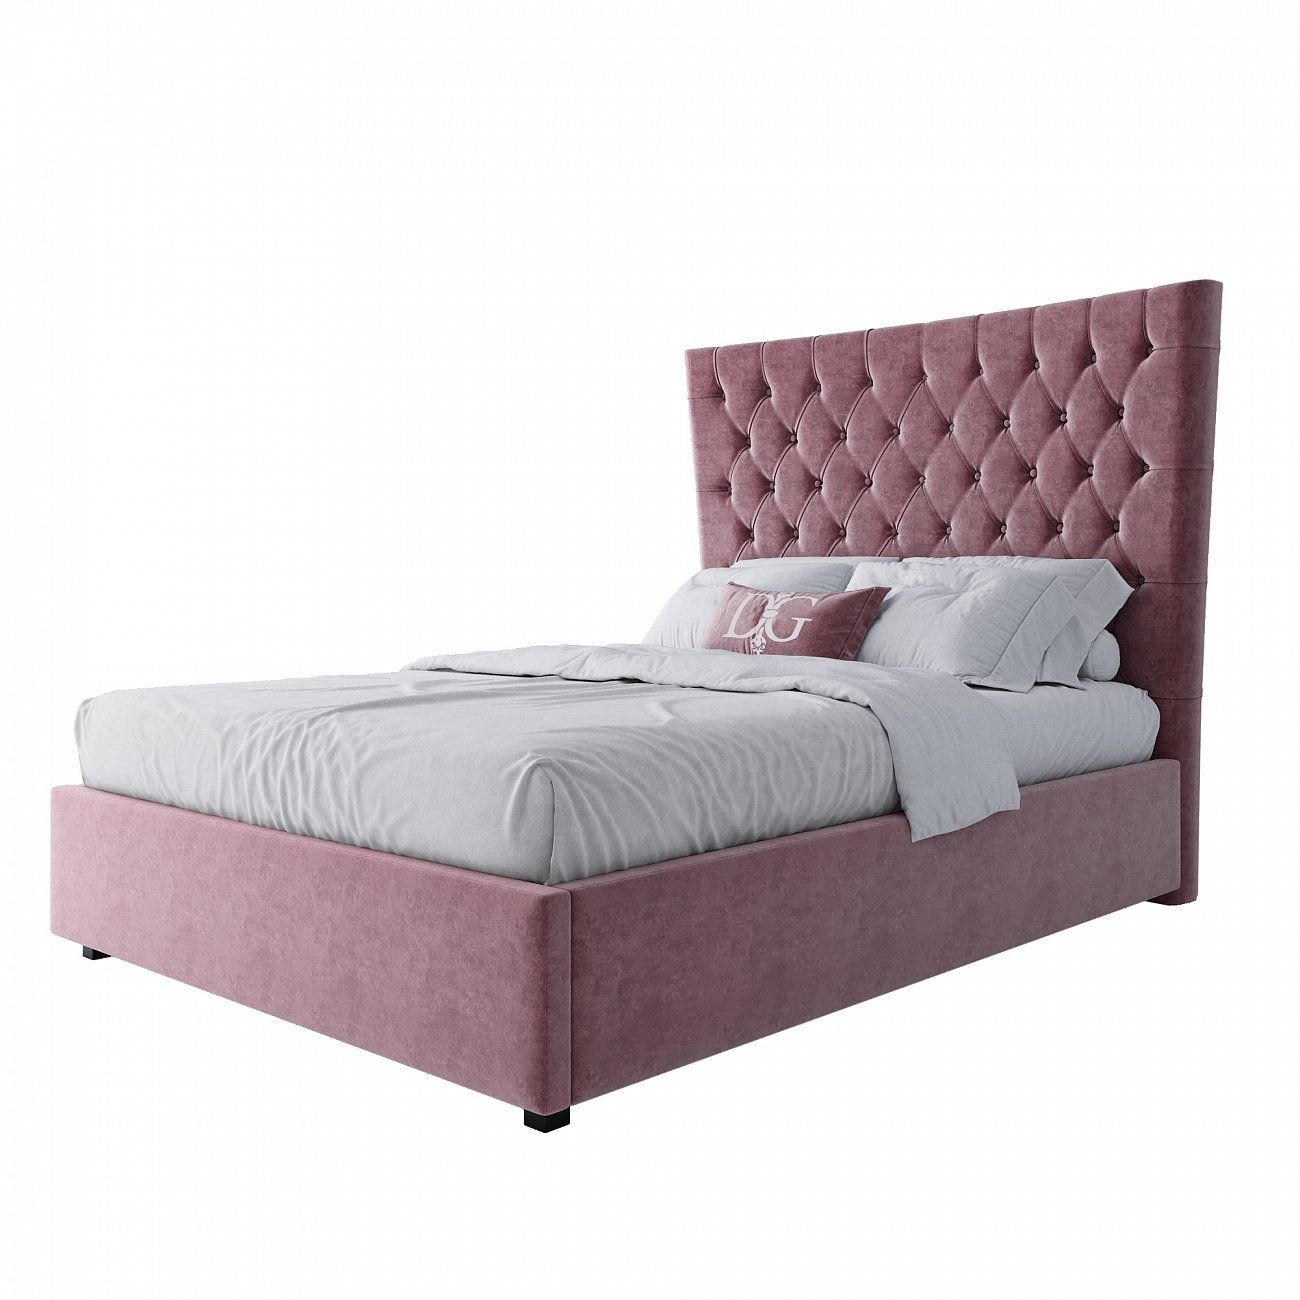 Semi-double teenage bed with a soft headboard 140x200 cm dusty rose QuickSand